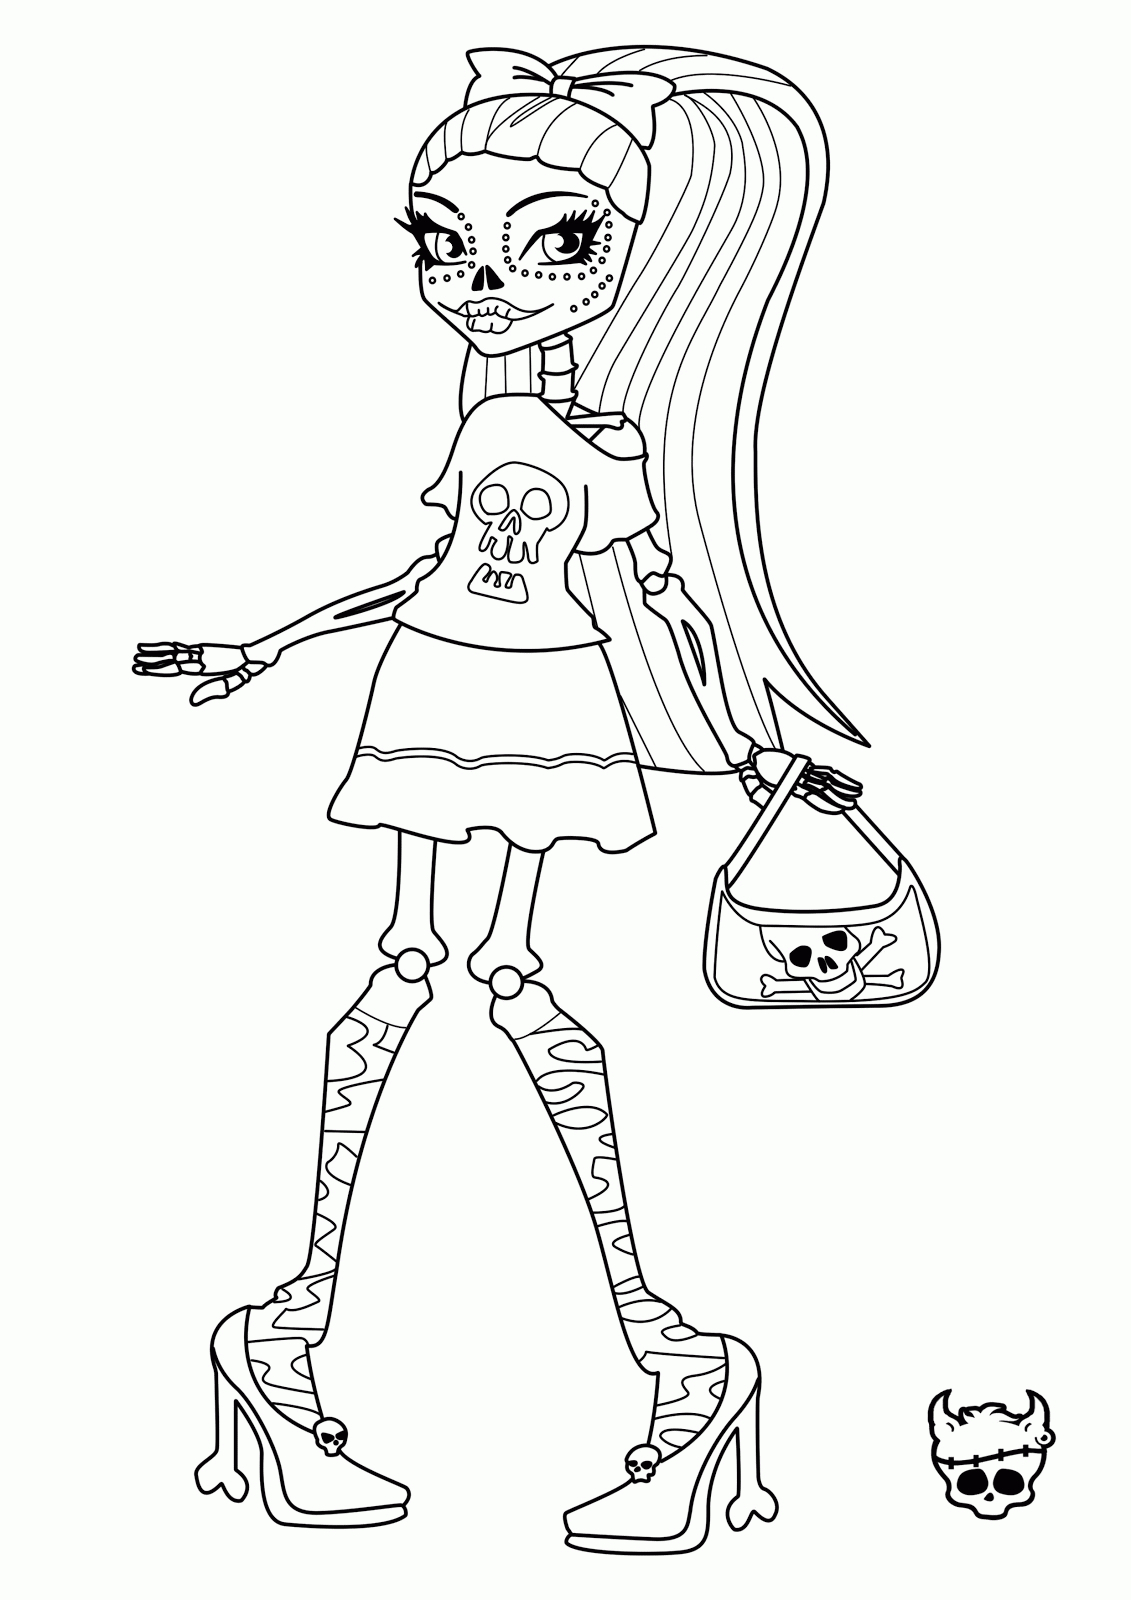 Free Printable Monster High Coloring Pages For Kids - Coloring Home - Monster High Free Printable Pictures